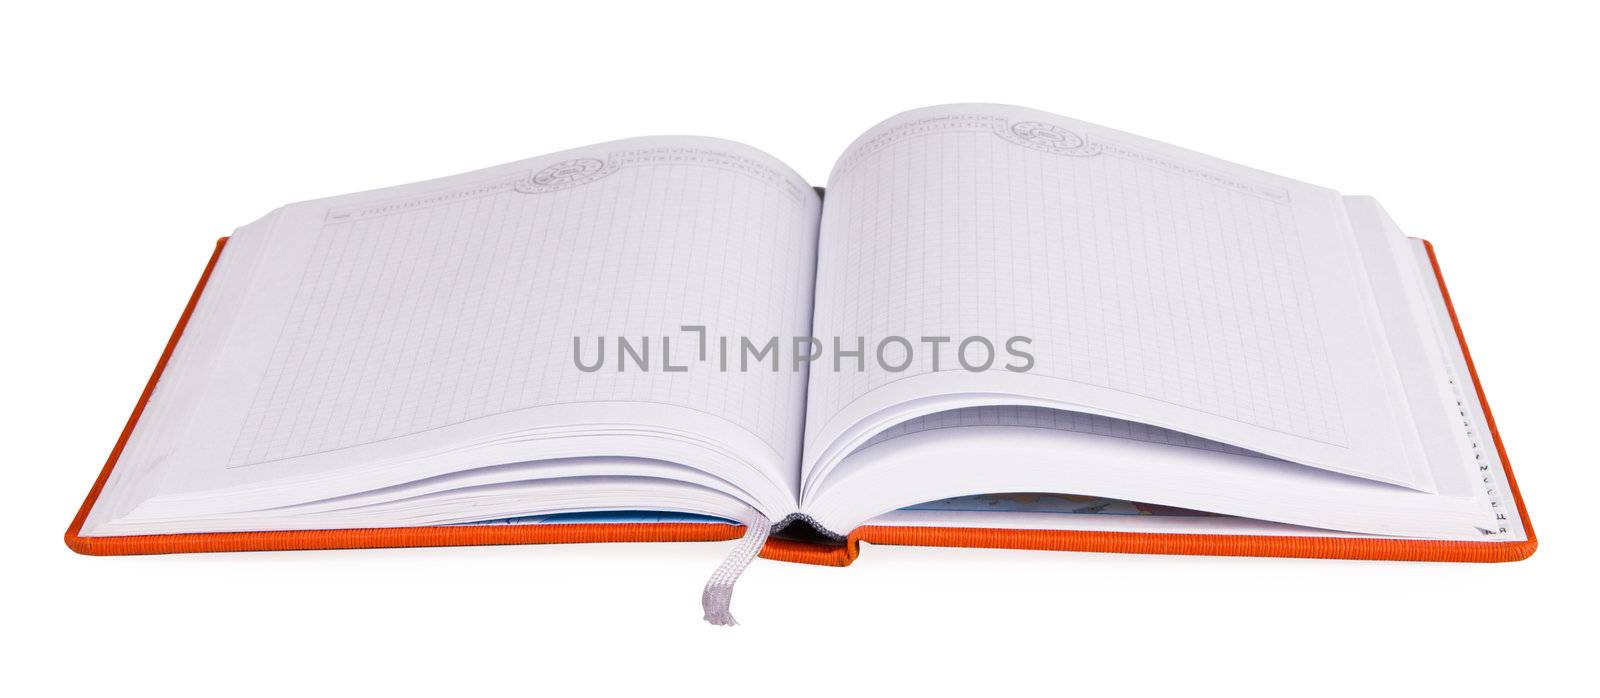 Blank notebook, isolated on white background